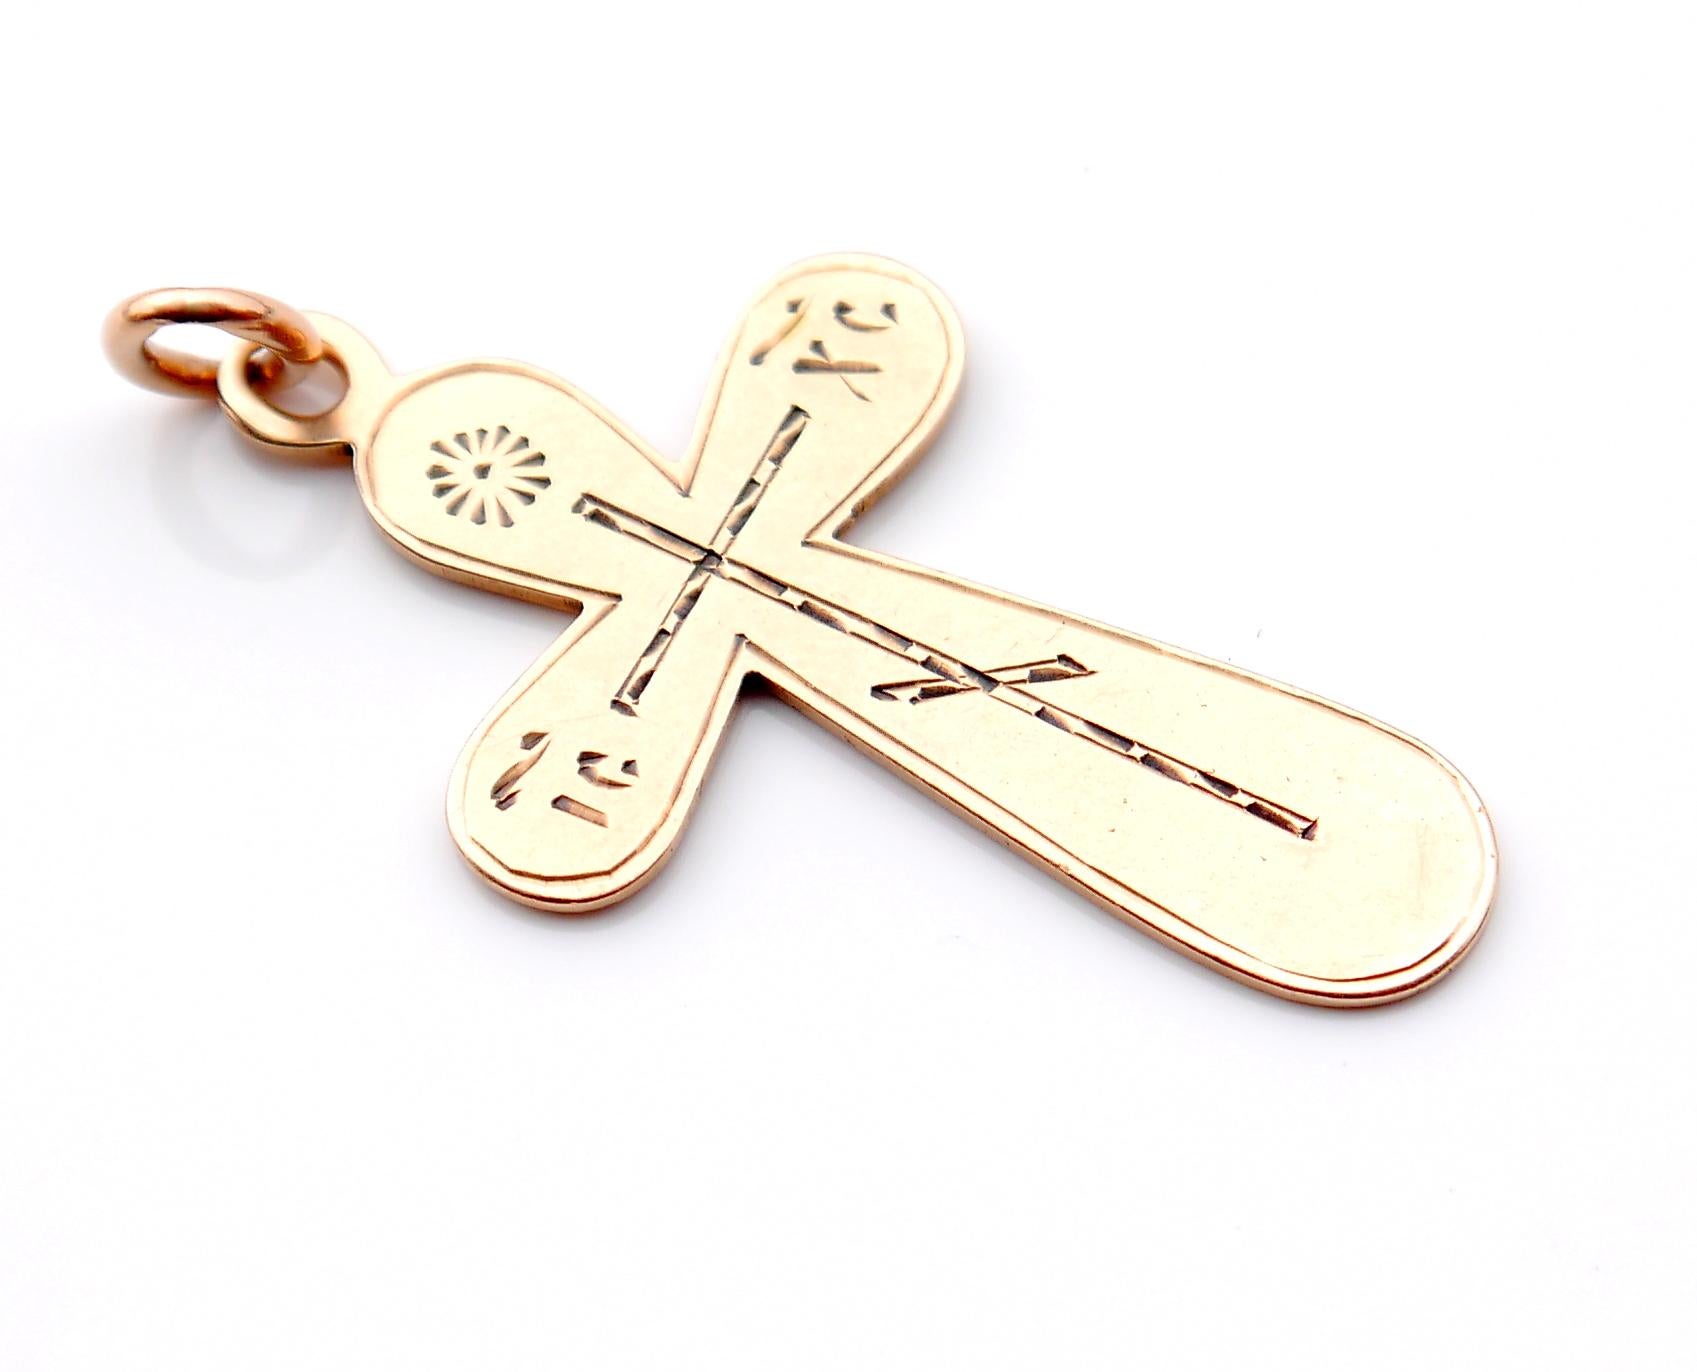 Russian Imperial Orthodox Cross Crucifix Solid 56 / 14K Gold /4.5cm / 4.2gr For Sale 3